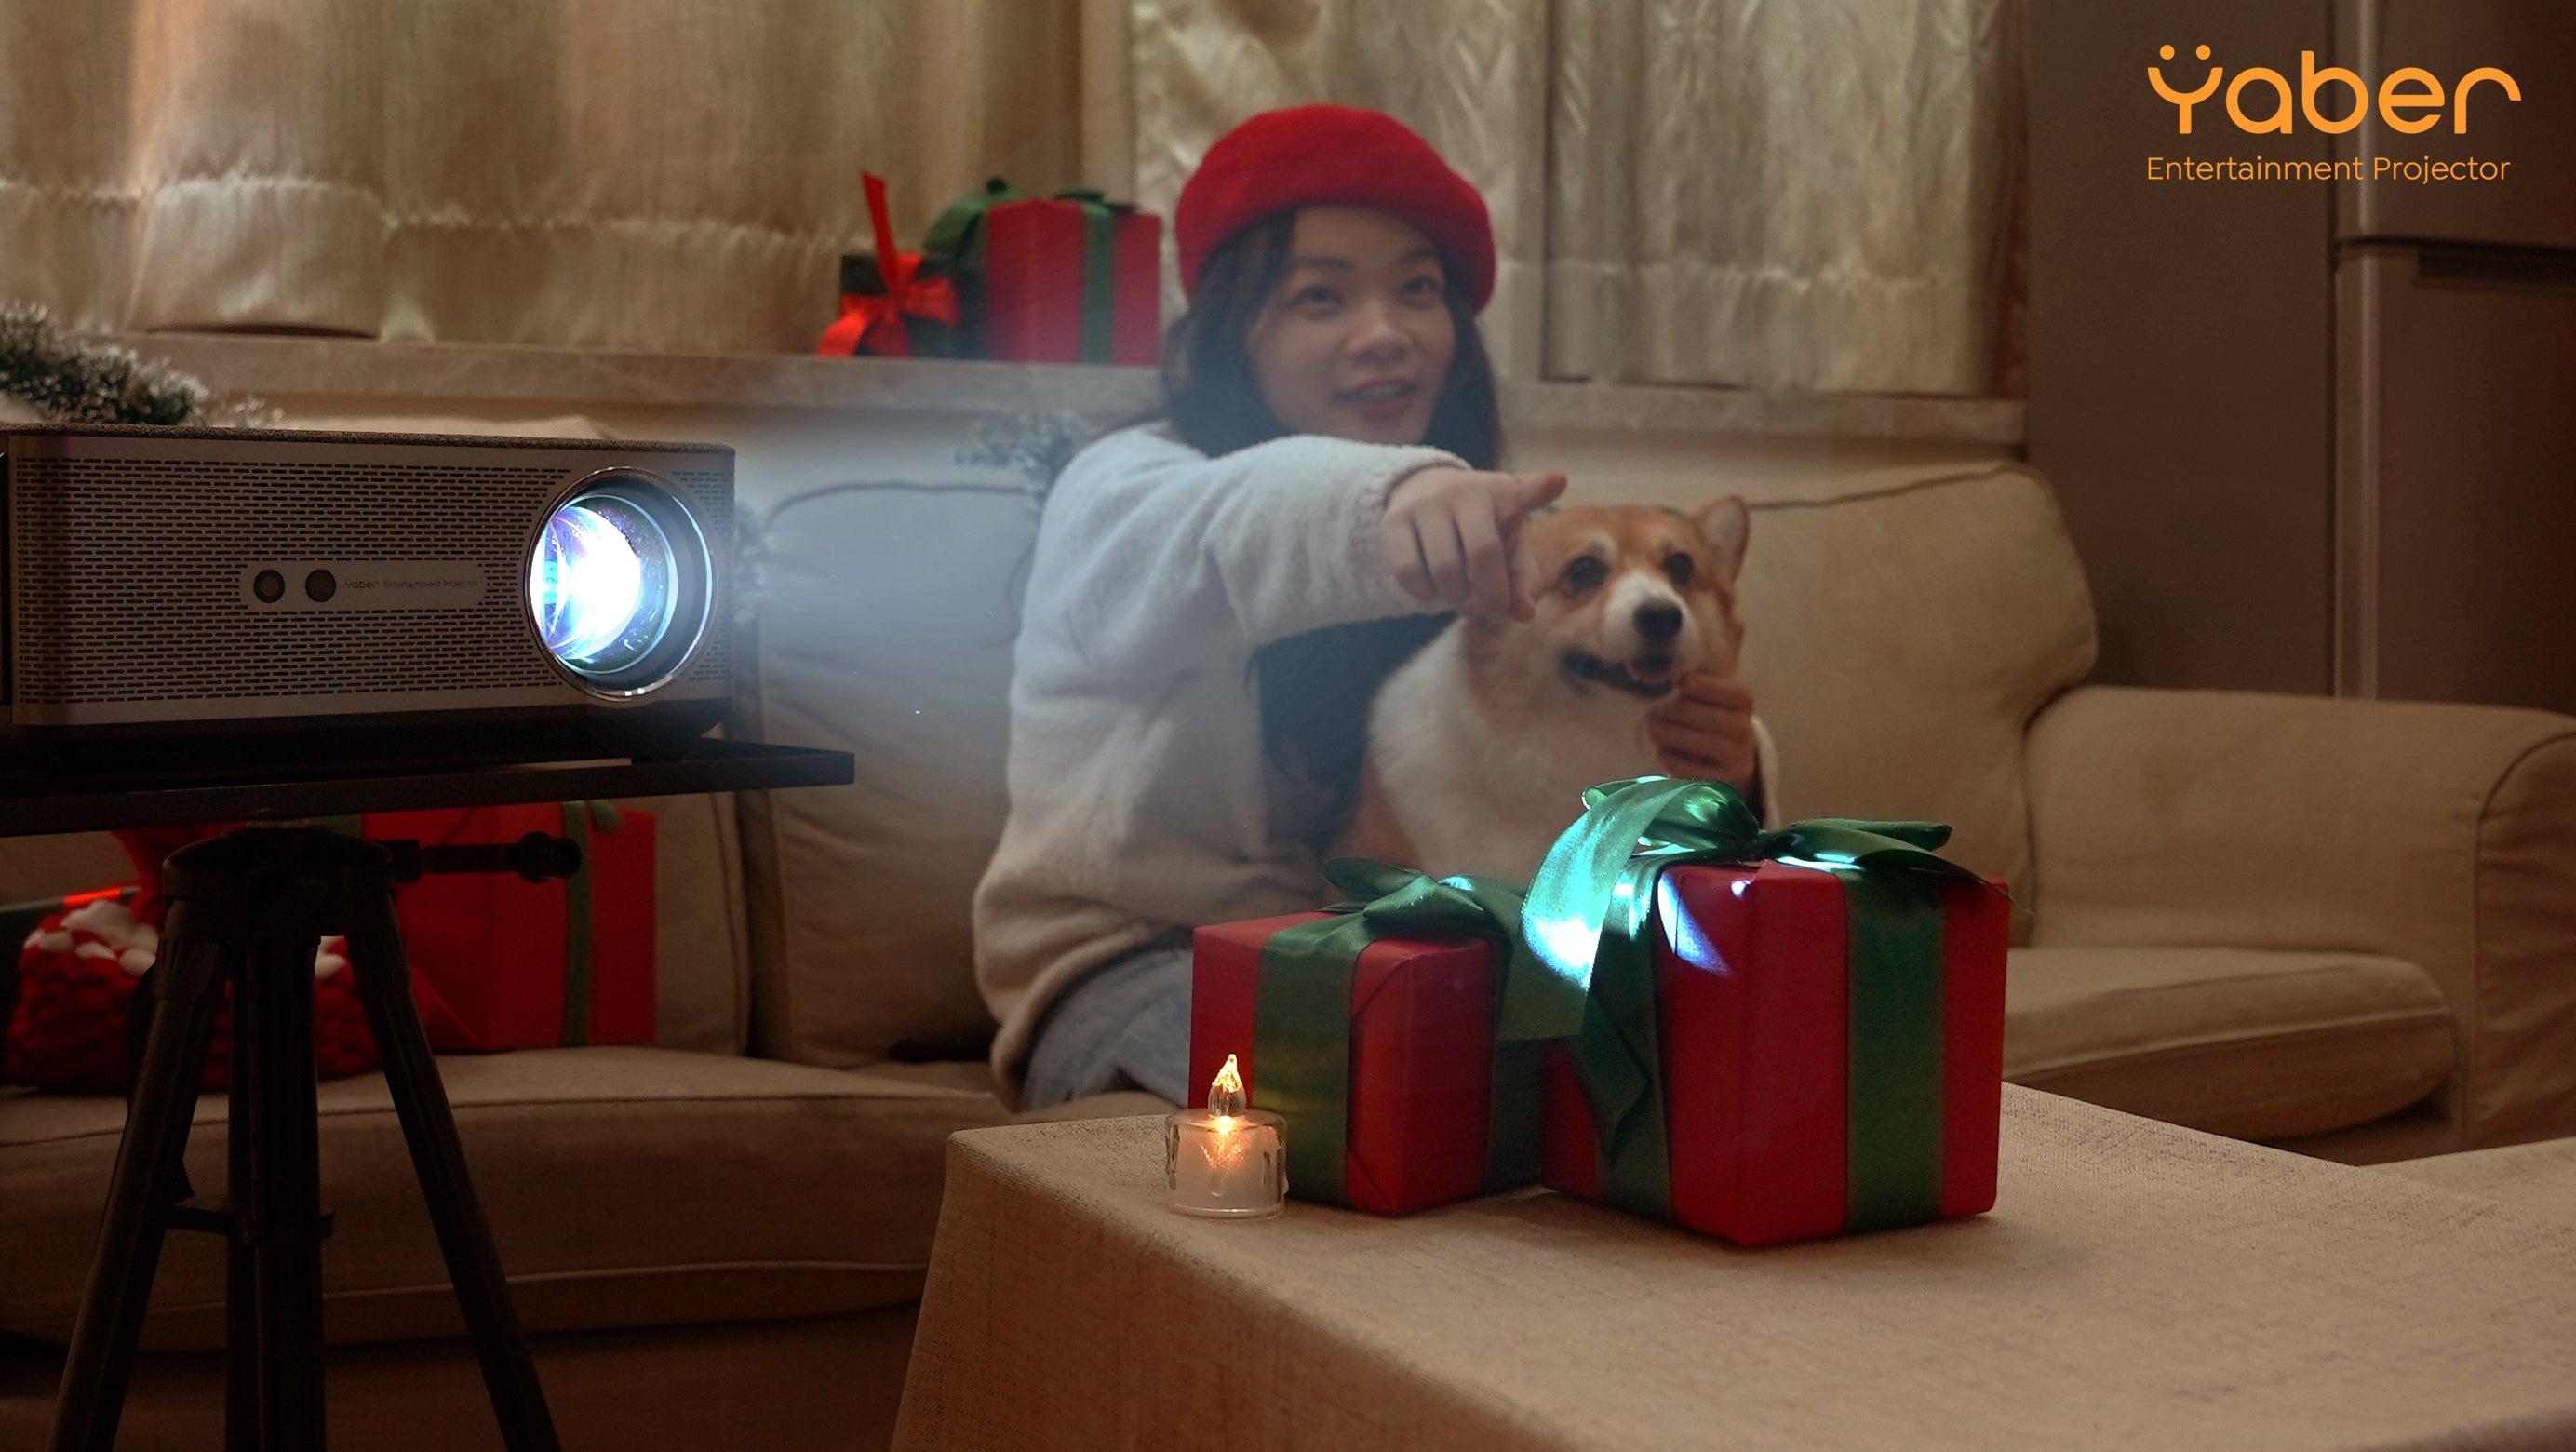 2022 Christmas Gift Ideas - A Yaber Projector is Perfect